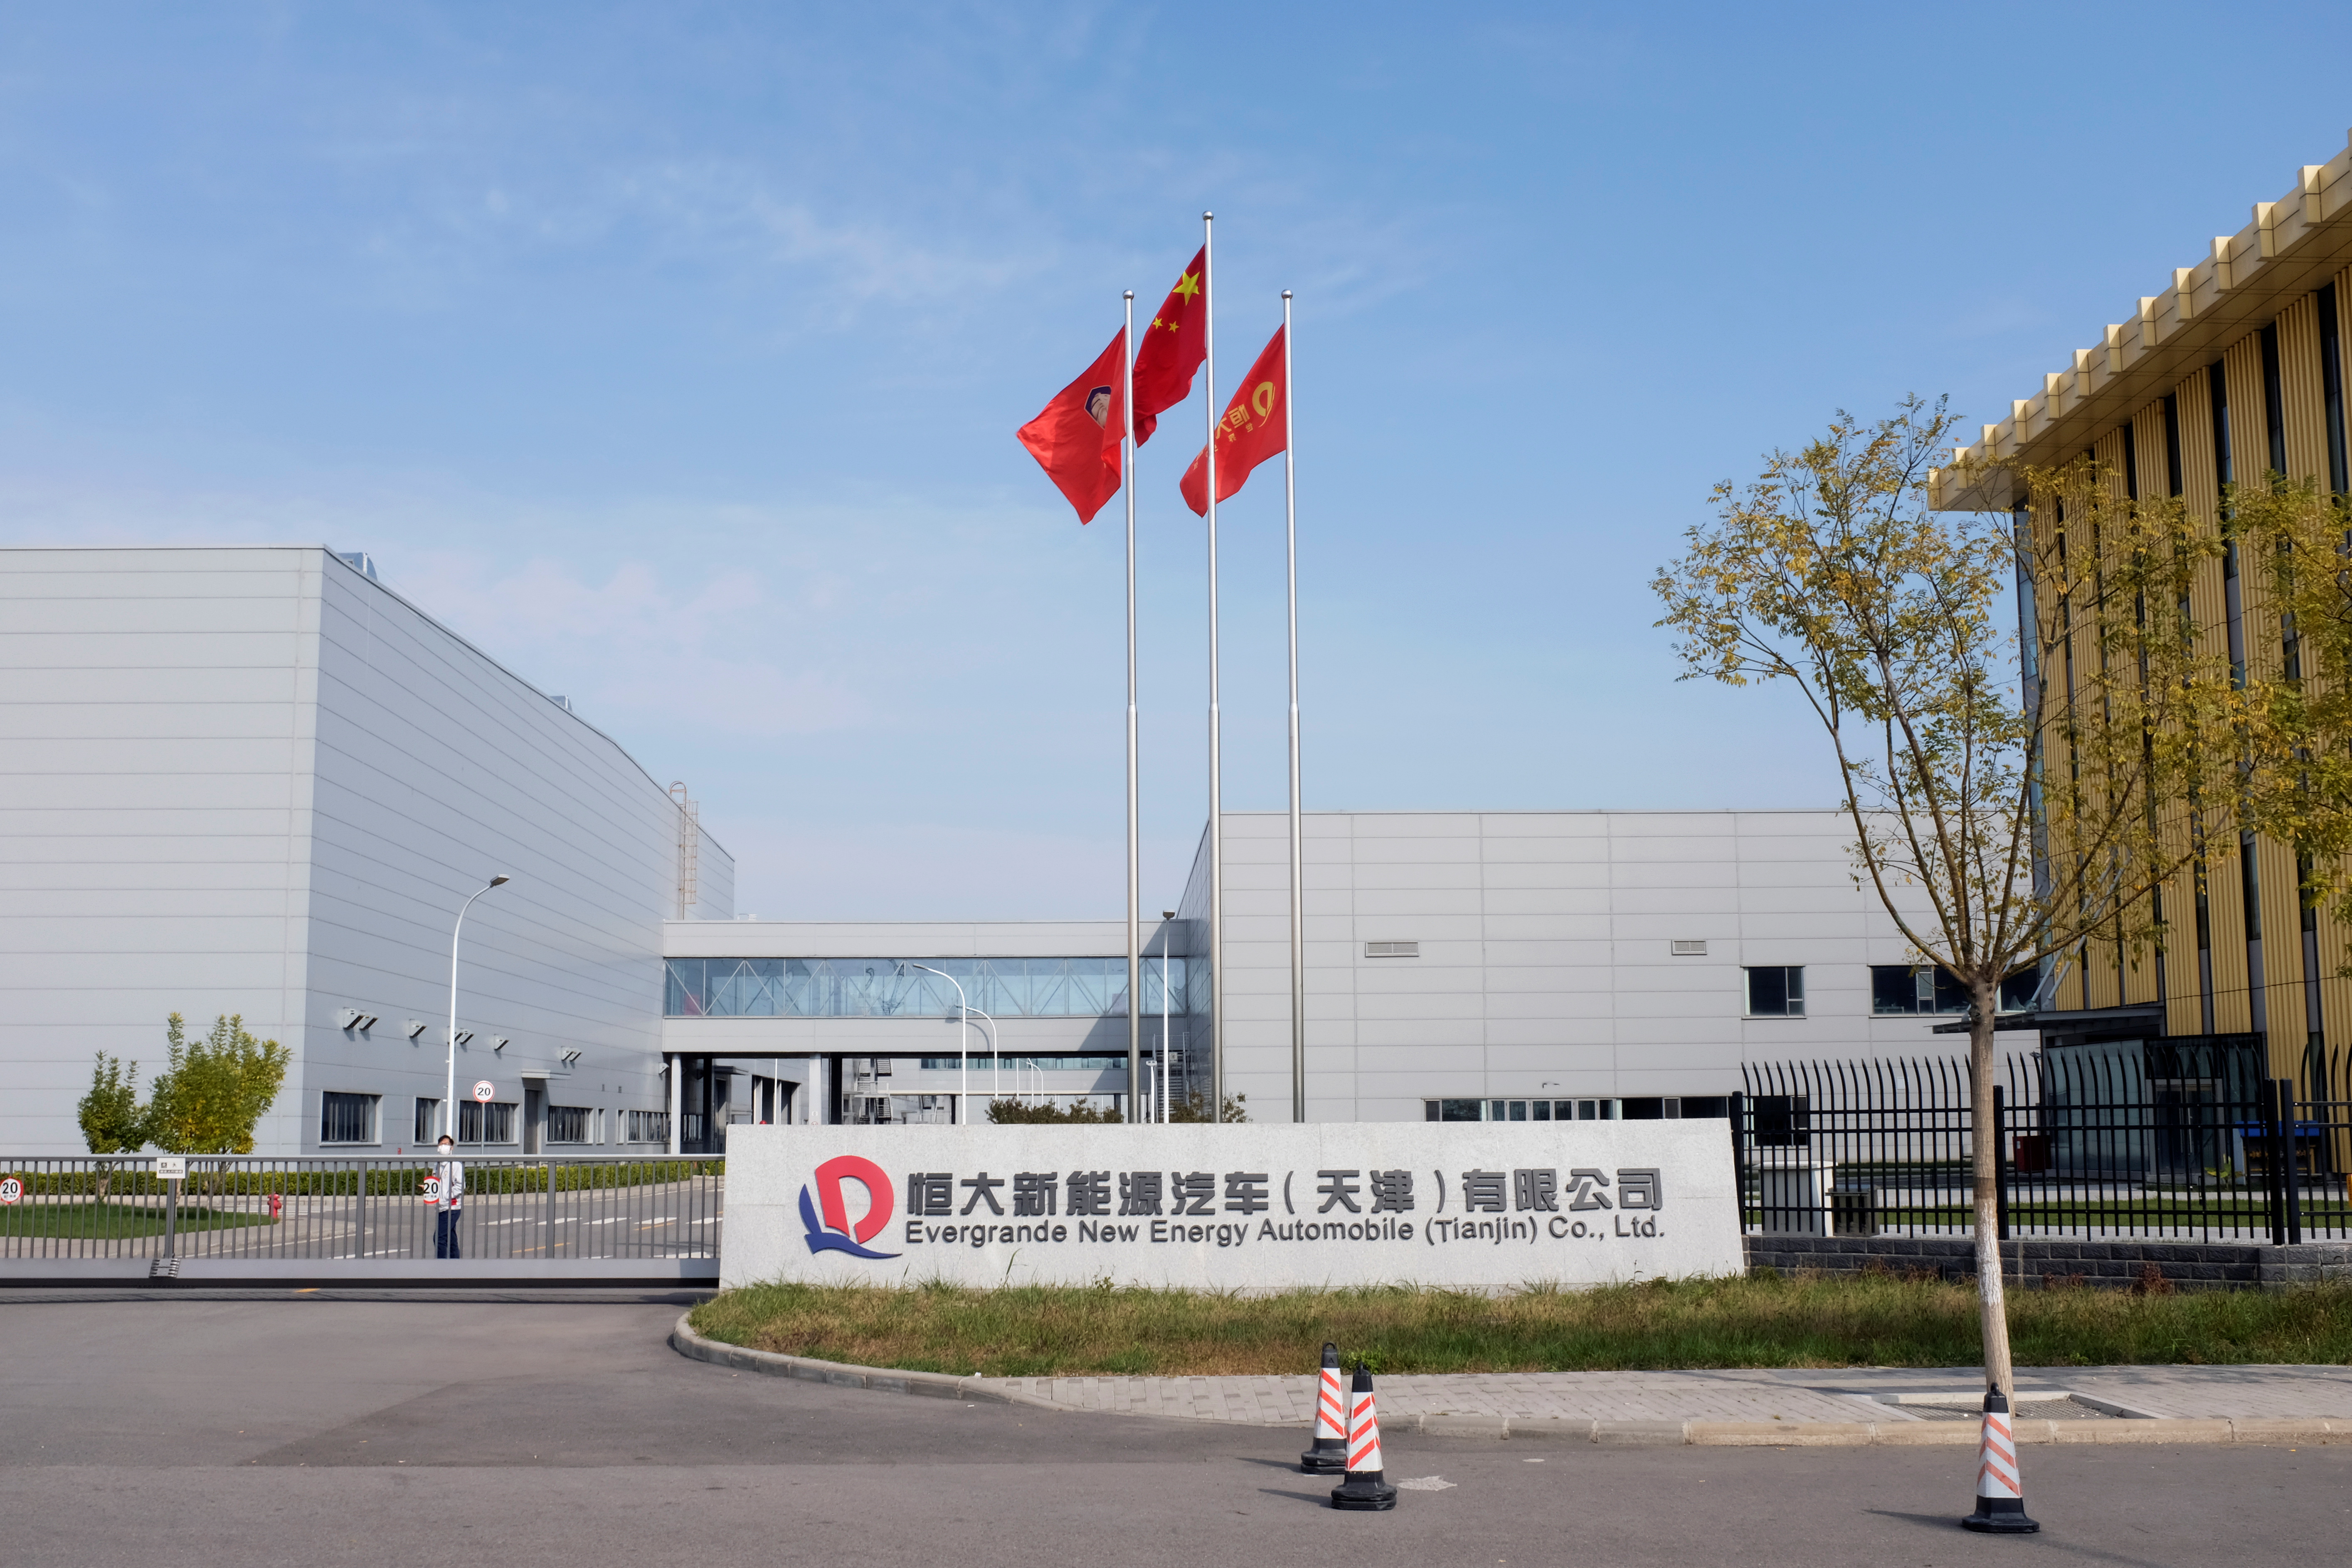 China Evergrande New Energy Vehicle factory in Tianjin